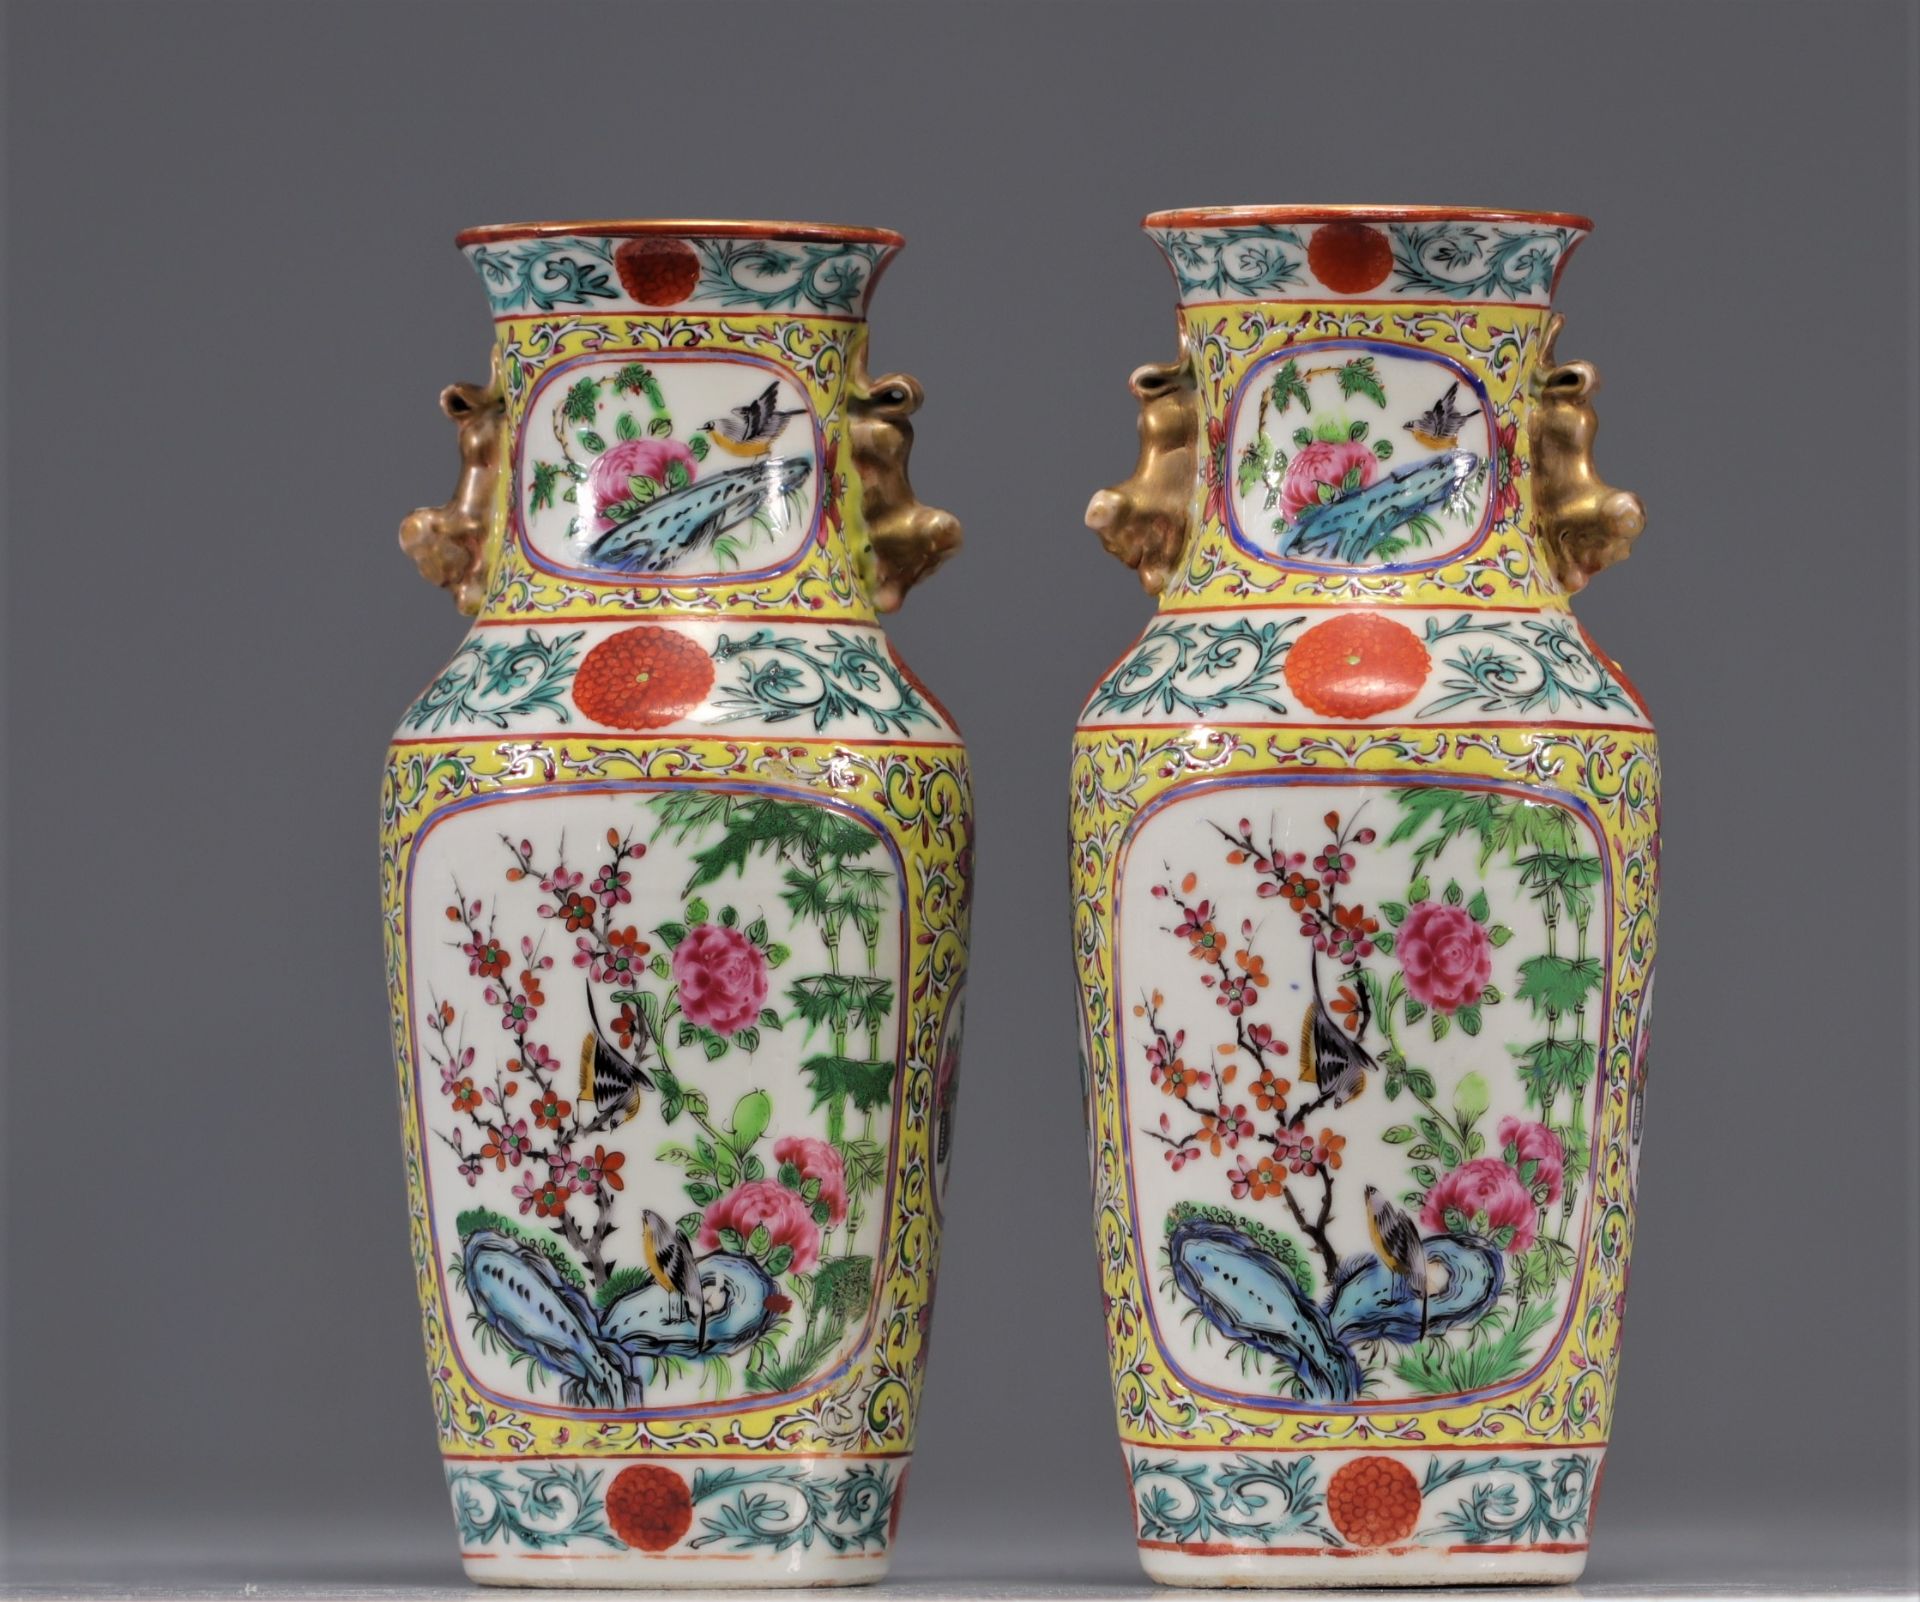 (2) Pair of Famille Rose porcelain vases on a yellow background - Image 2 of 4